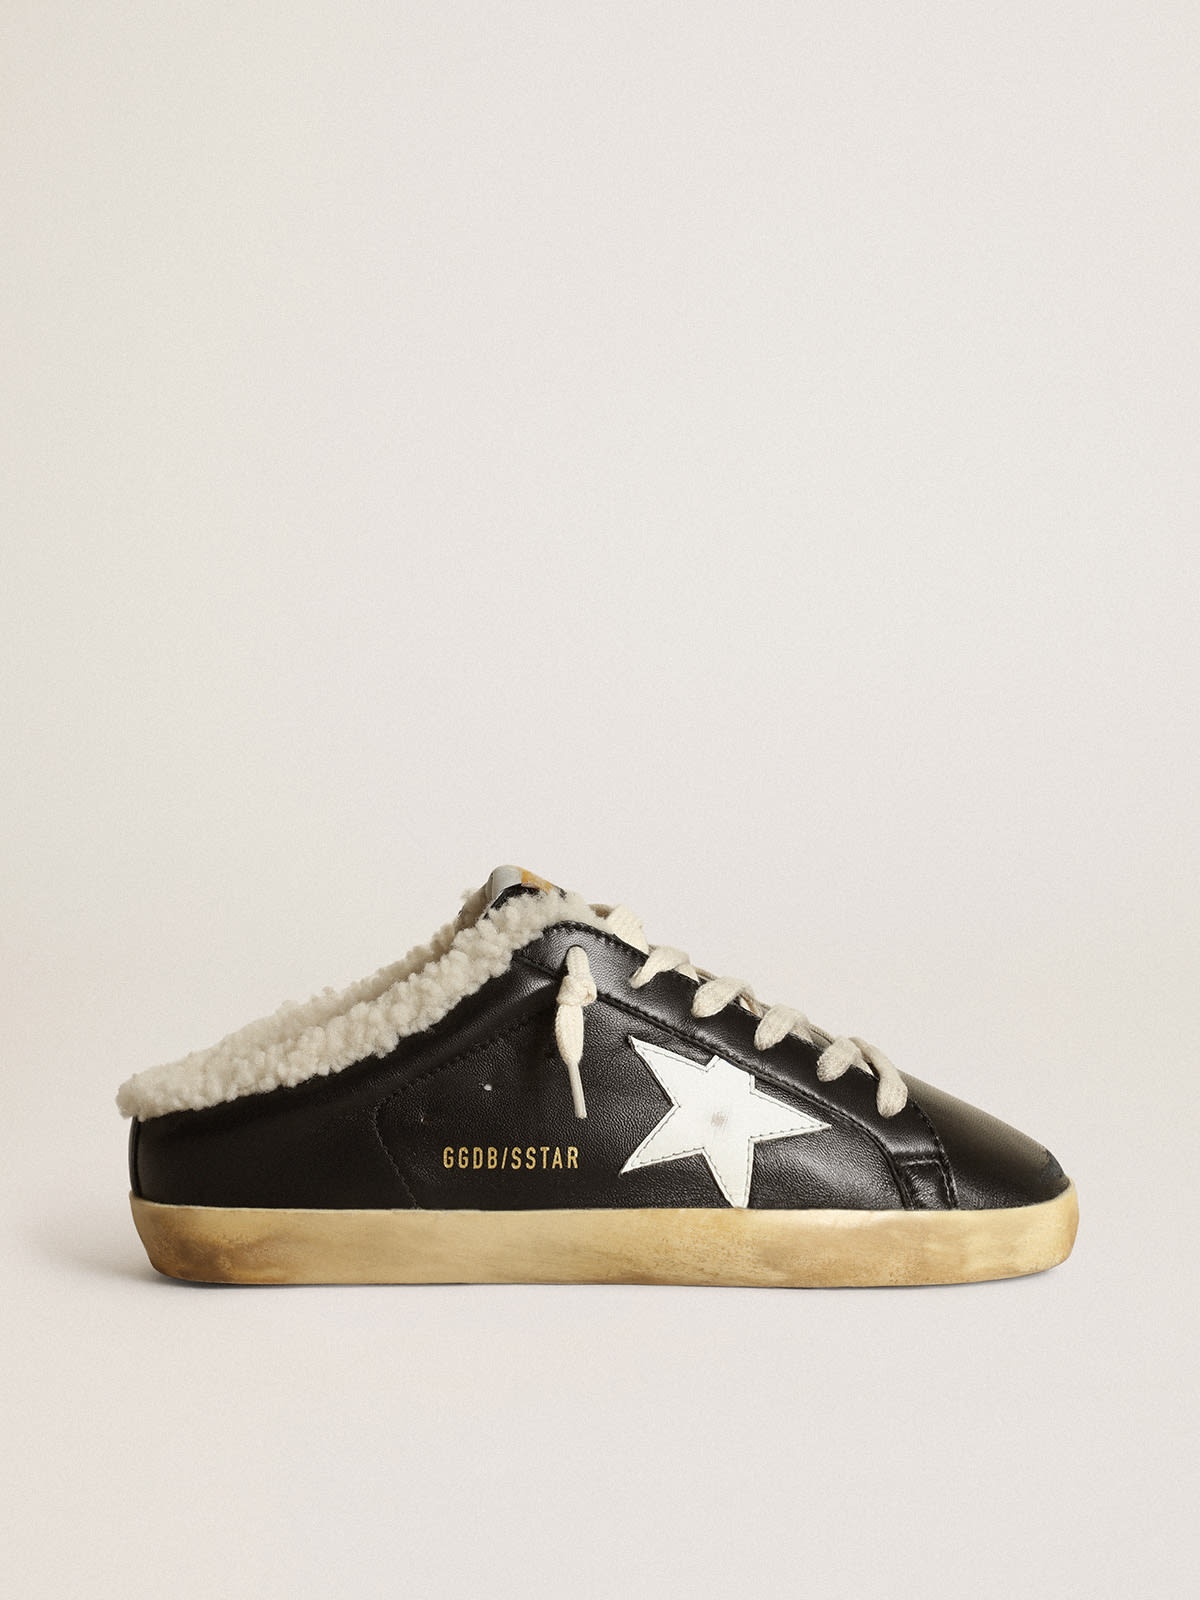 Golden Goose Super-Star Sabots in black nappa leather with white leather  star and beige shearling lining | REVERSIBLE